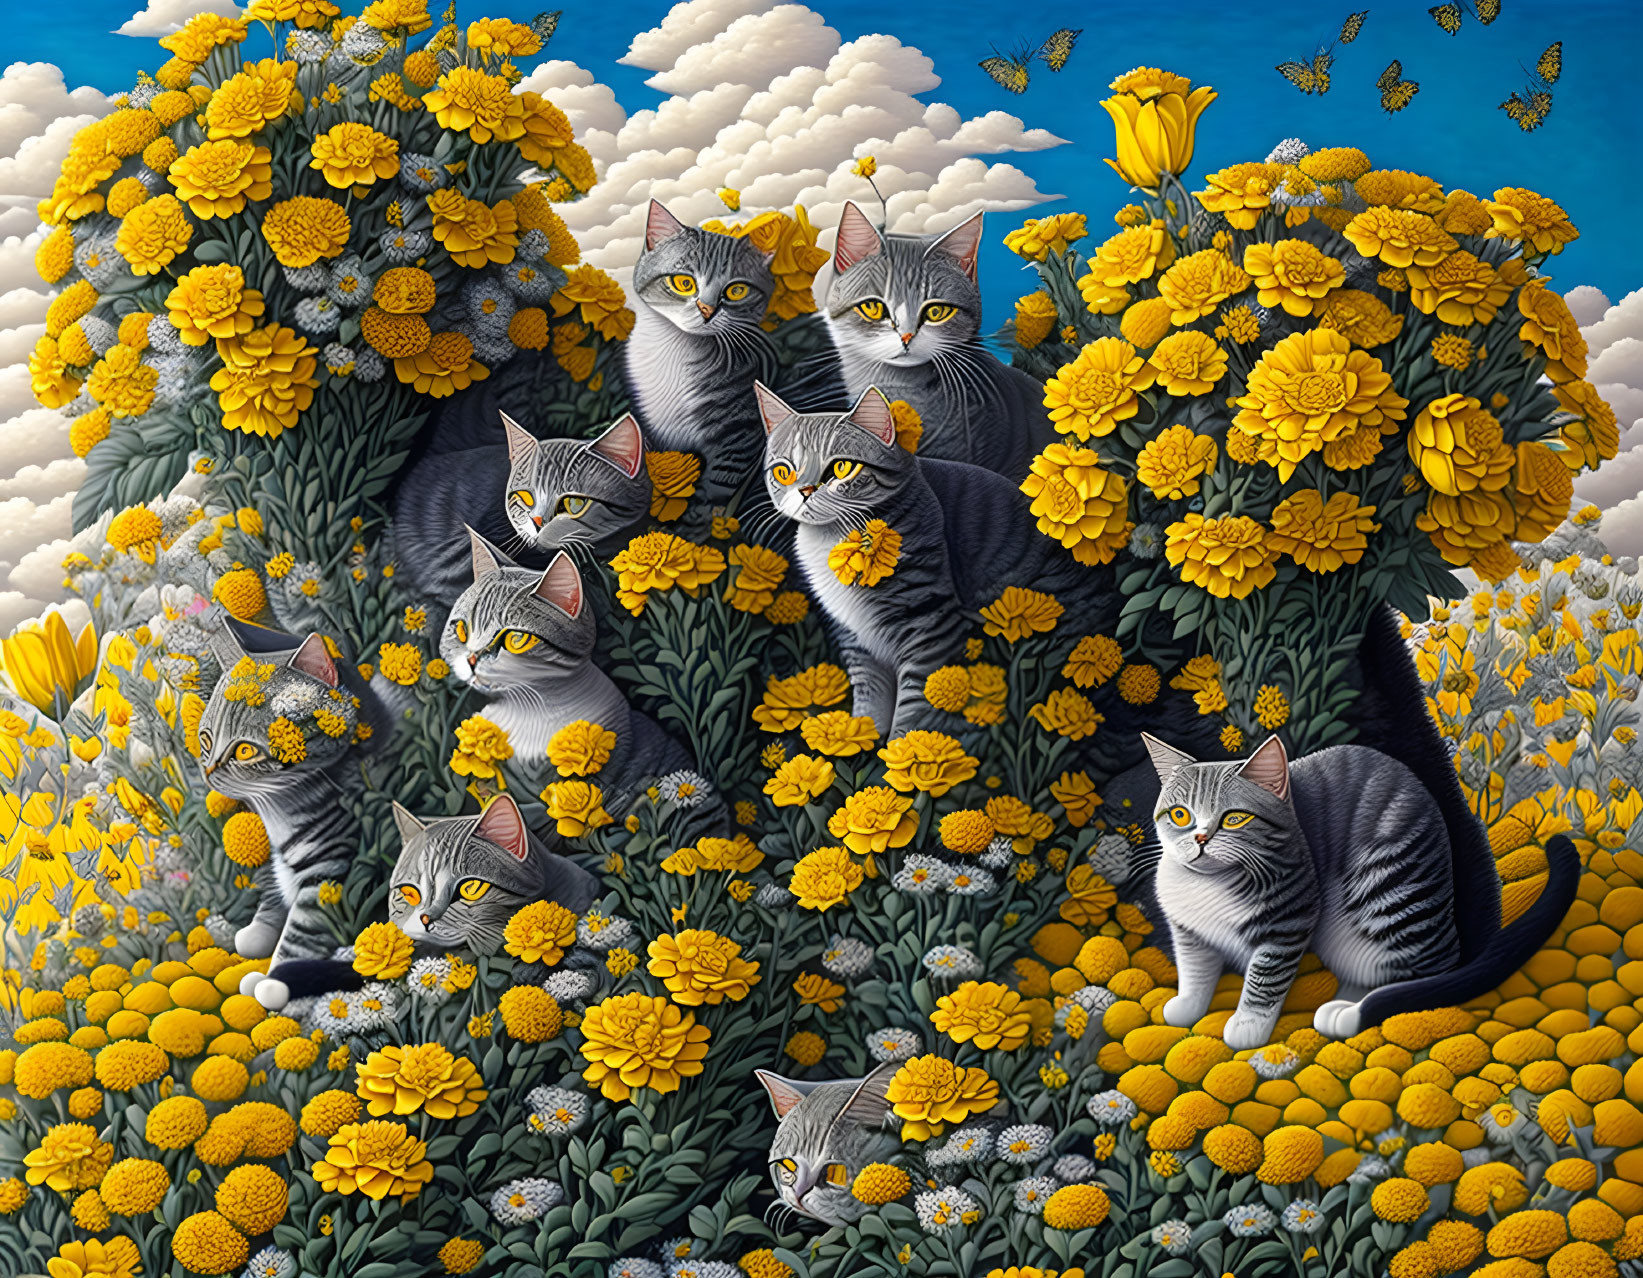 Grey-striped cats blend in yellow marigold flowers under blue sky.